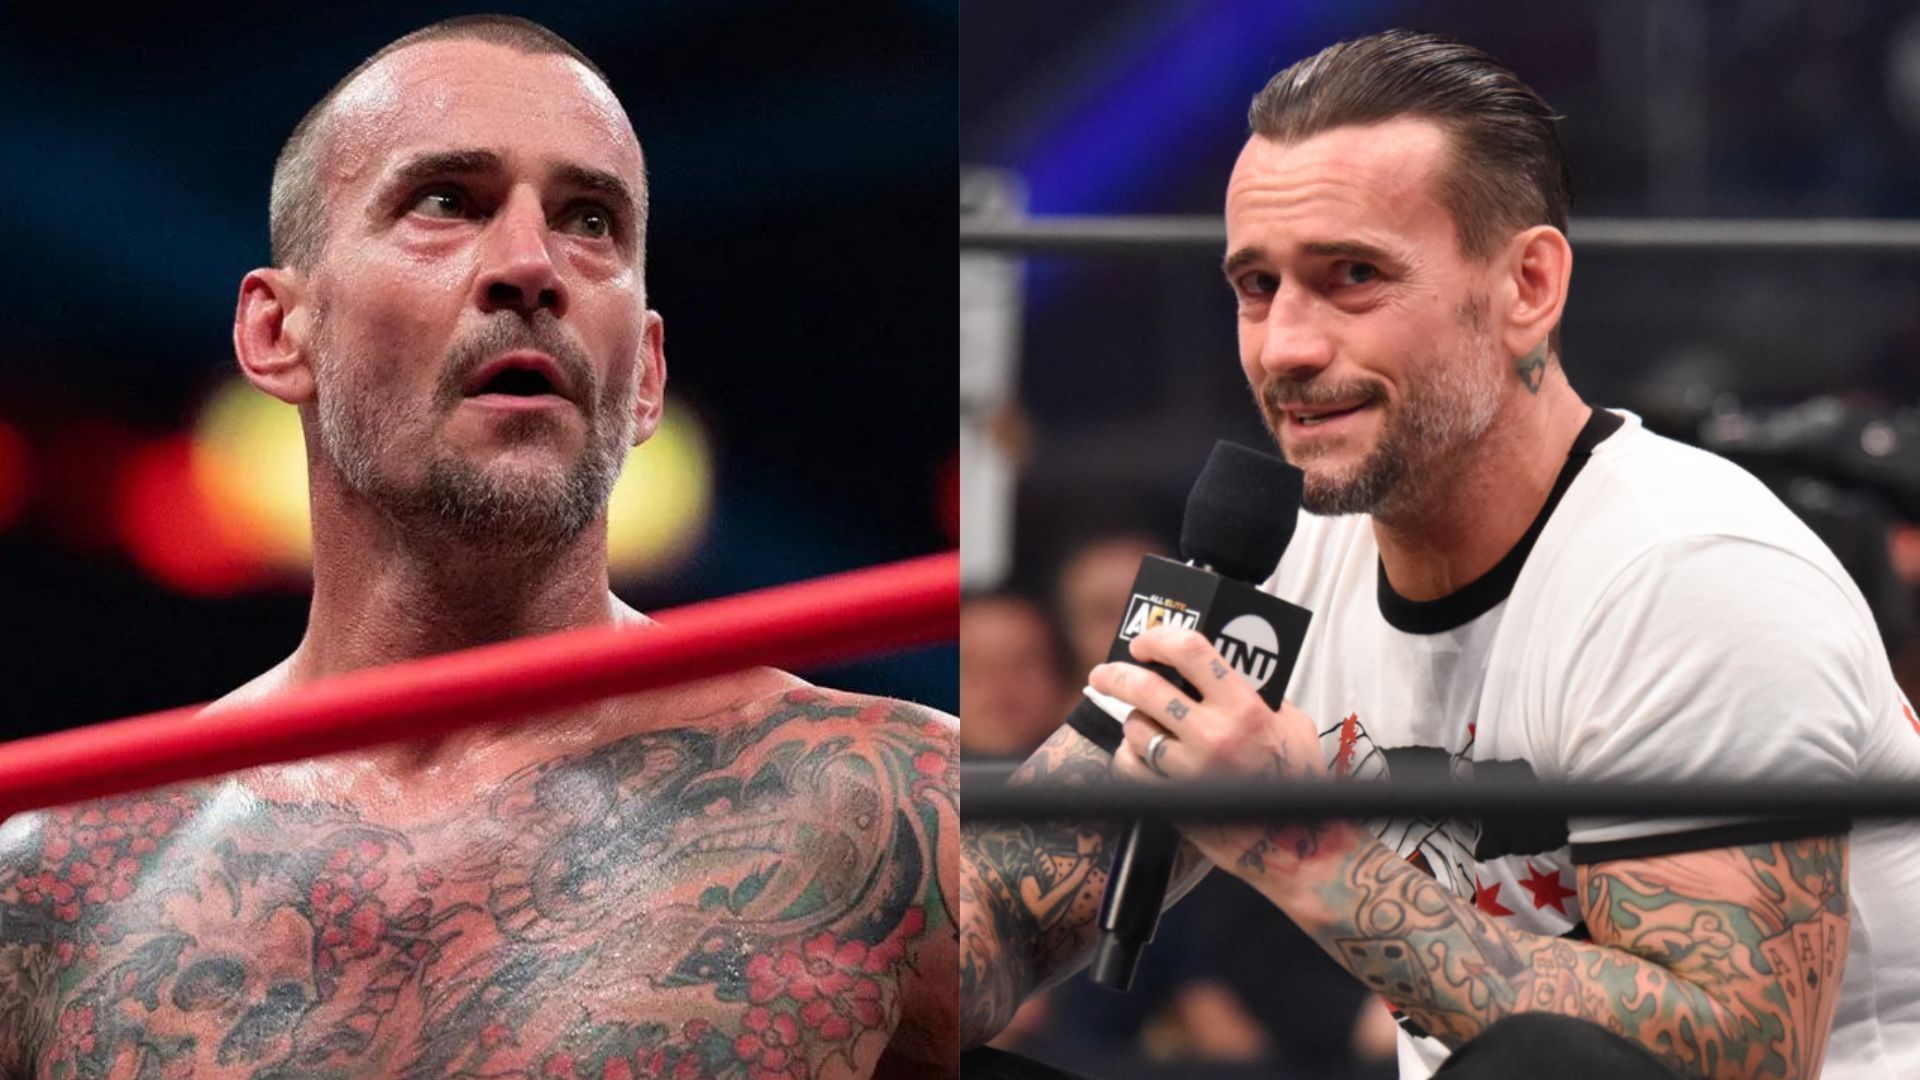 Punk was fired by AEW in September.